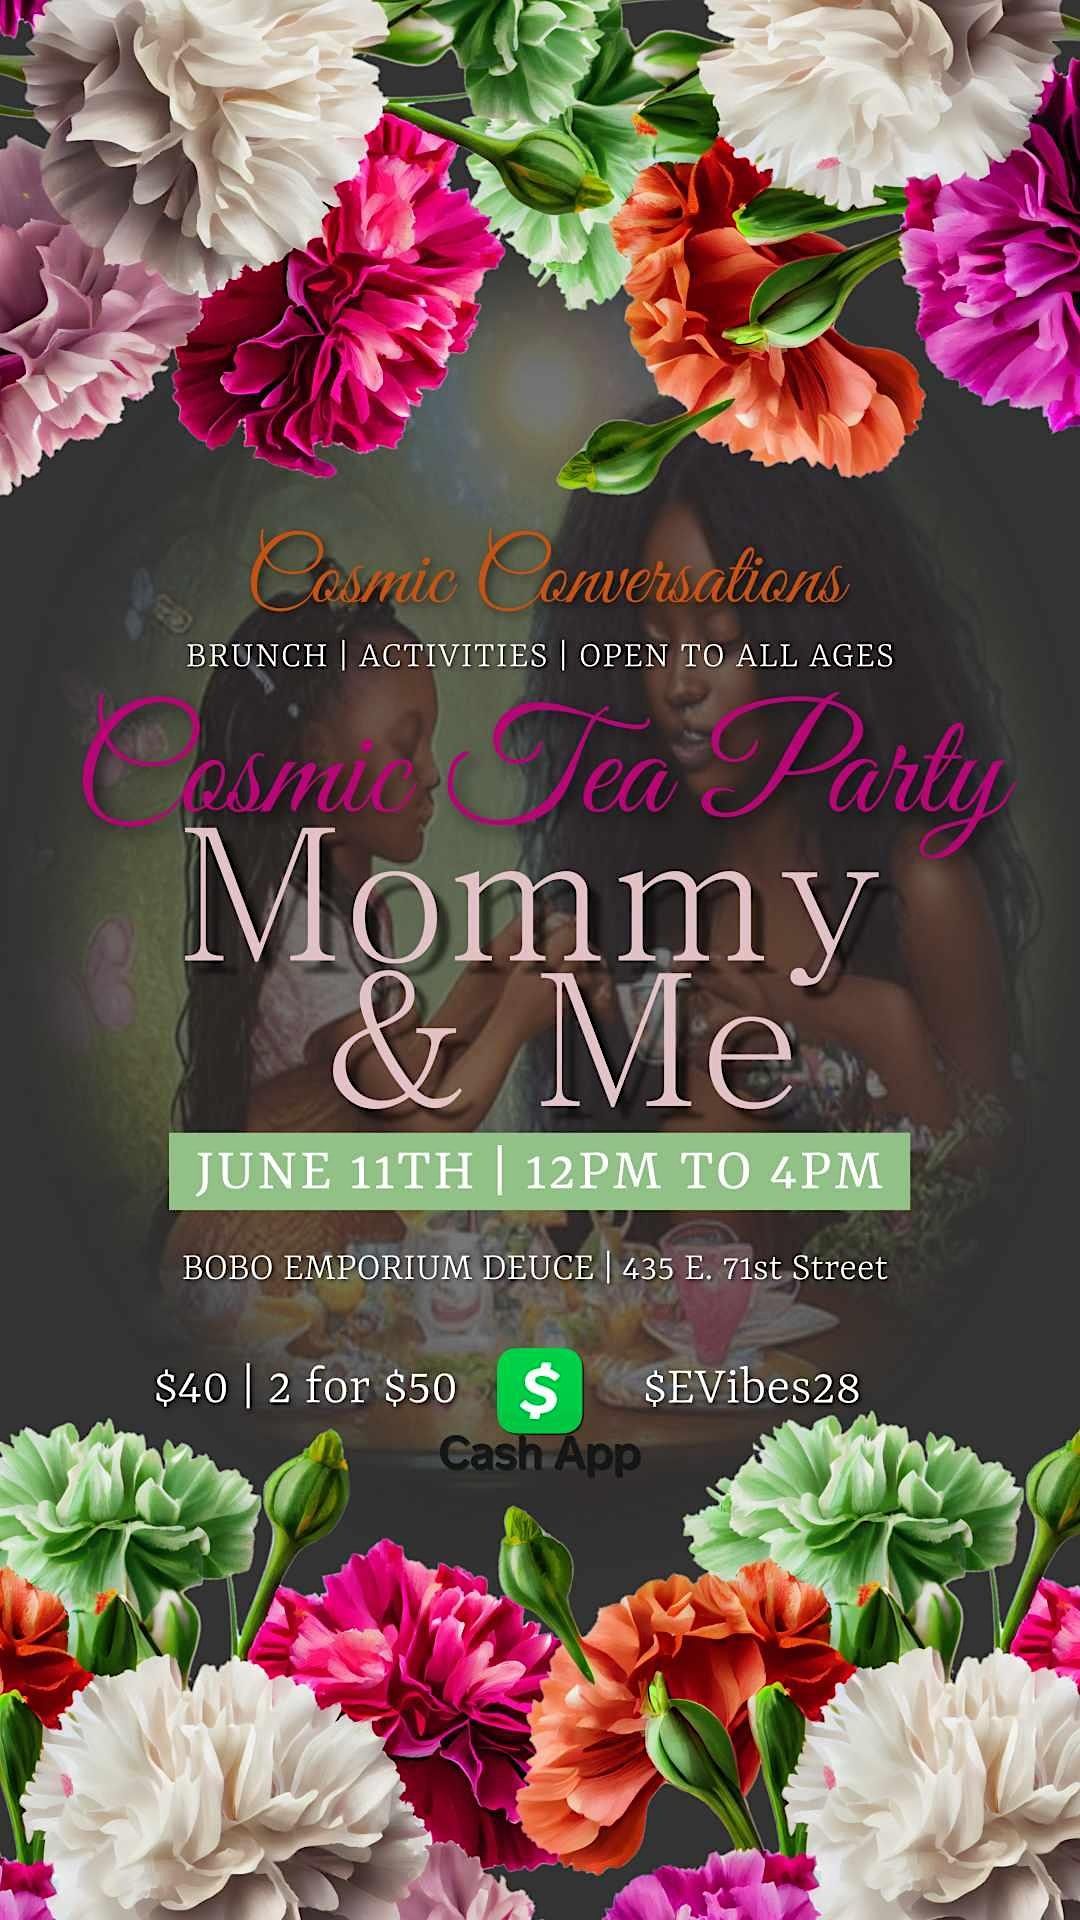 Cosmic Tea Party Mommy & Me